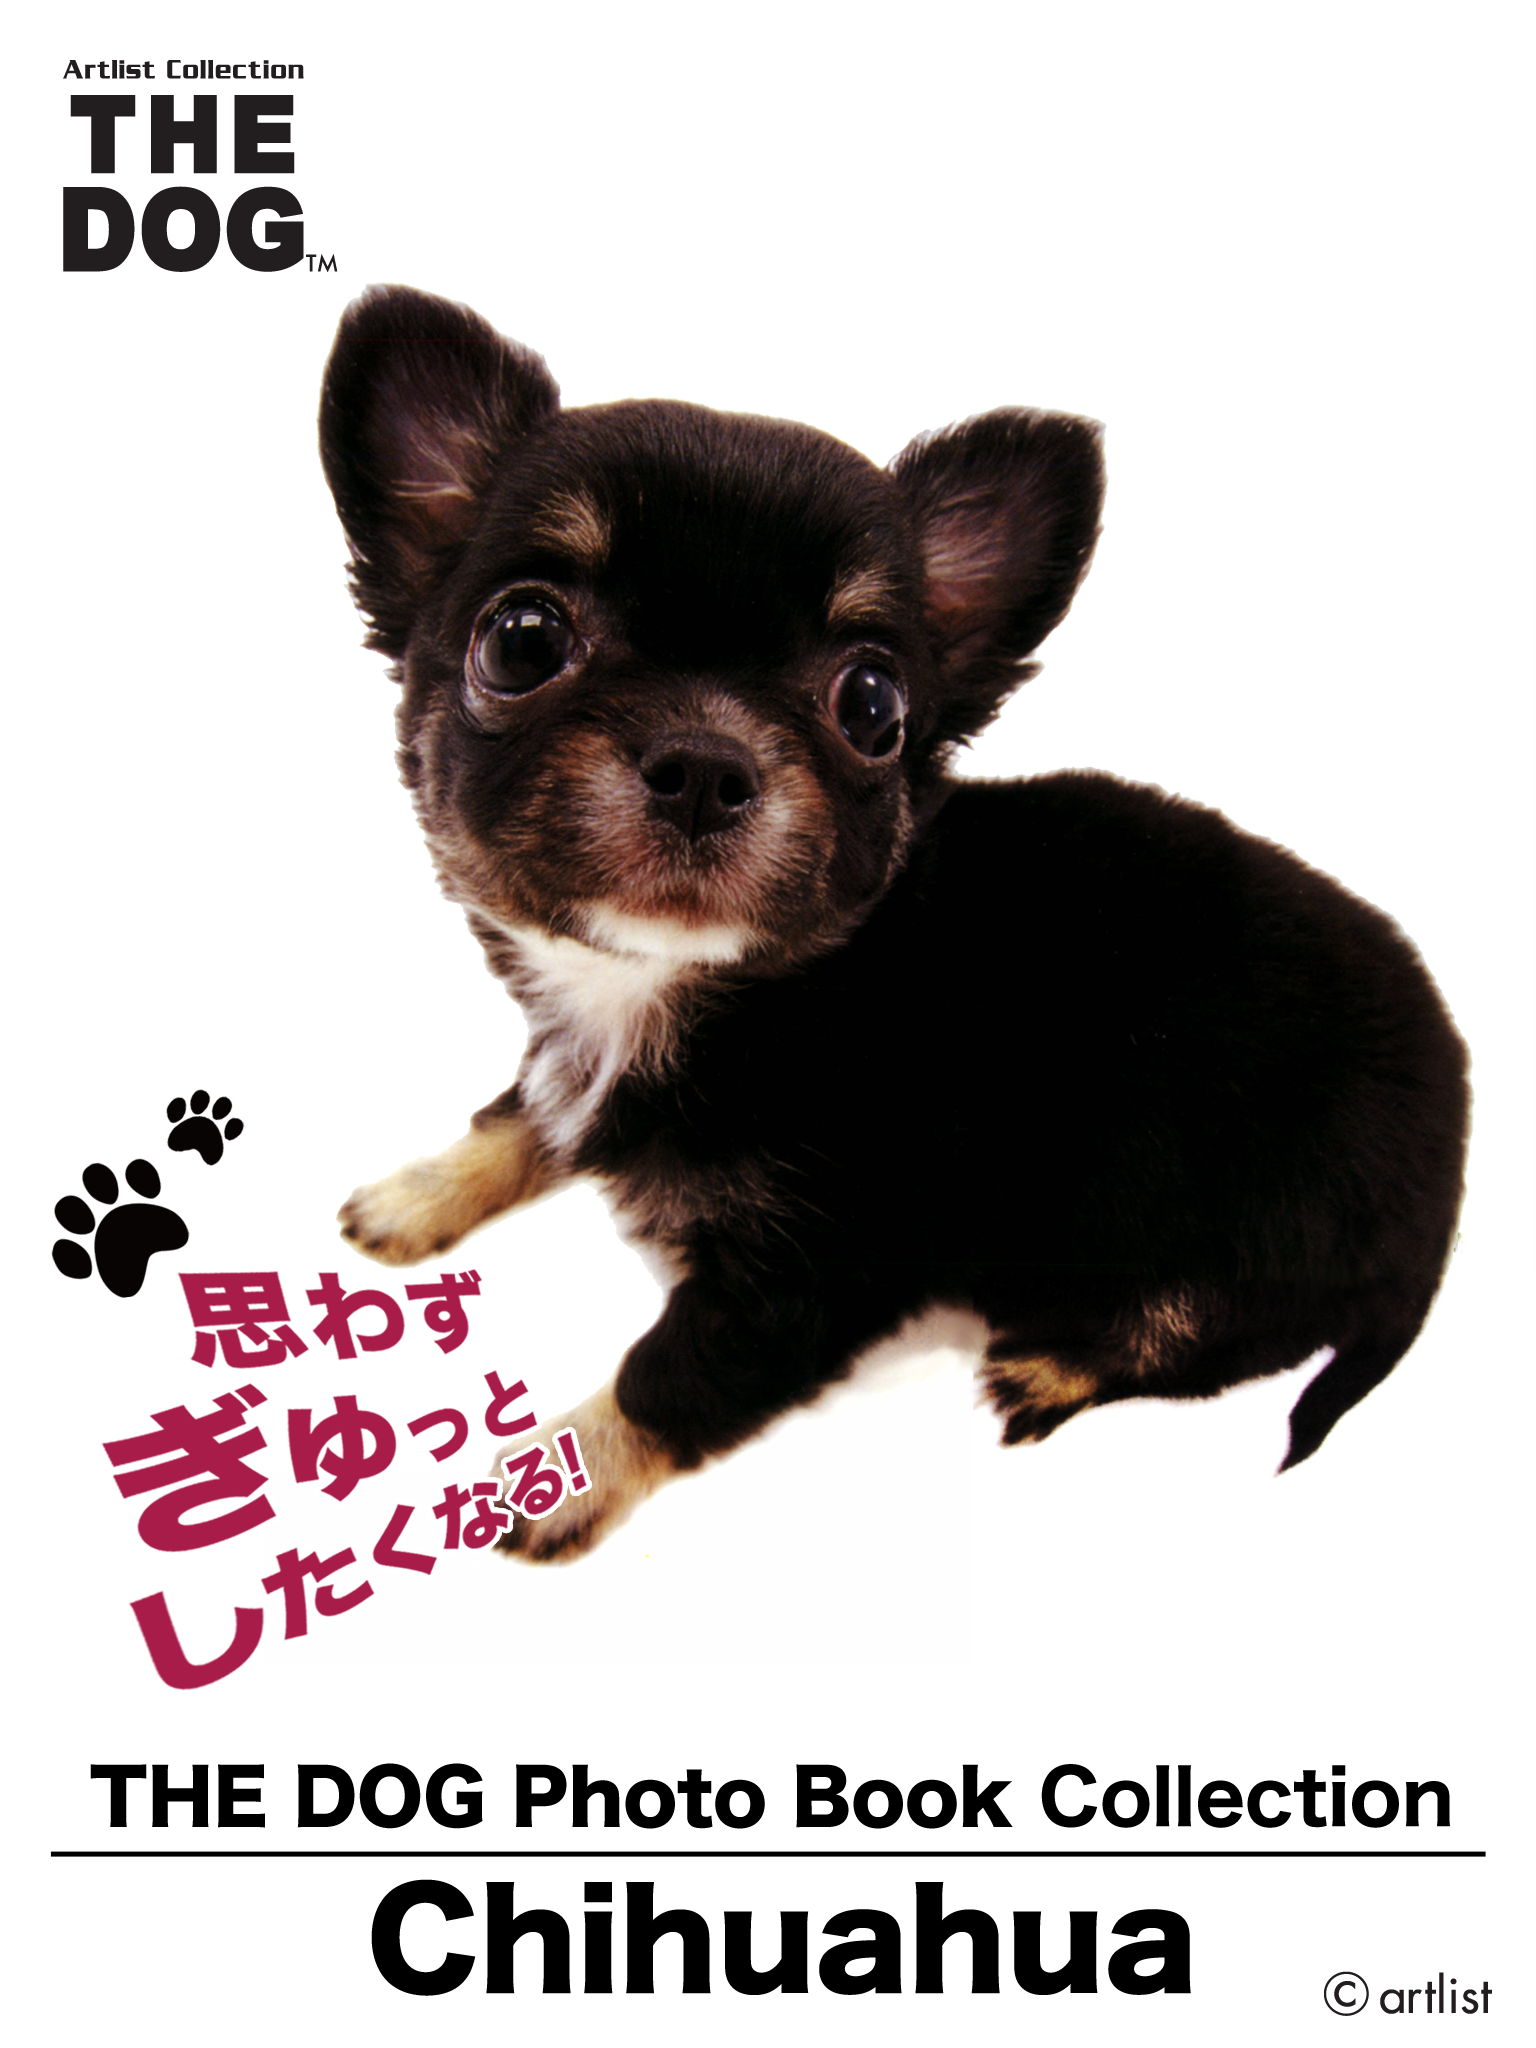 The dog Photo Book Collection Chihuahua